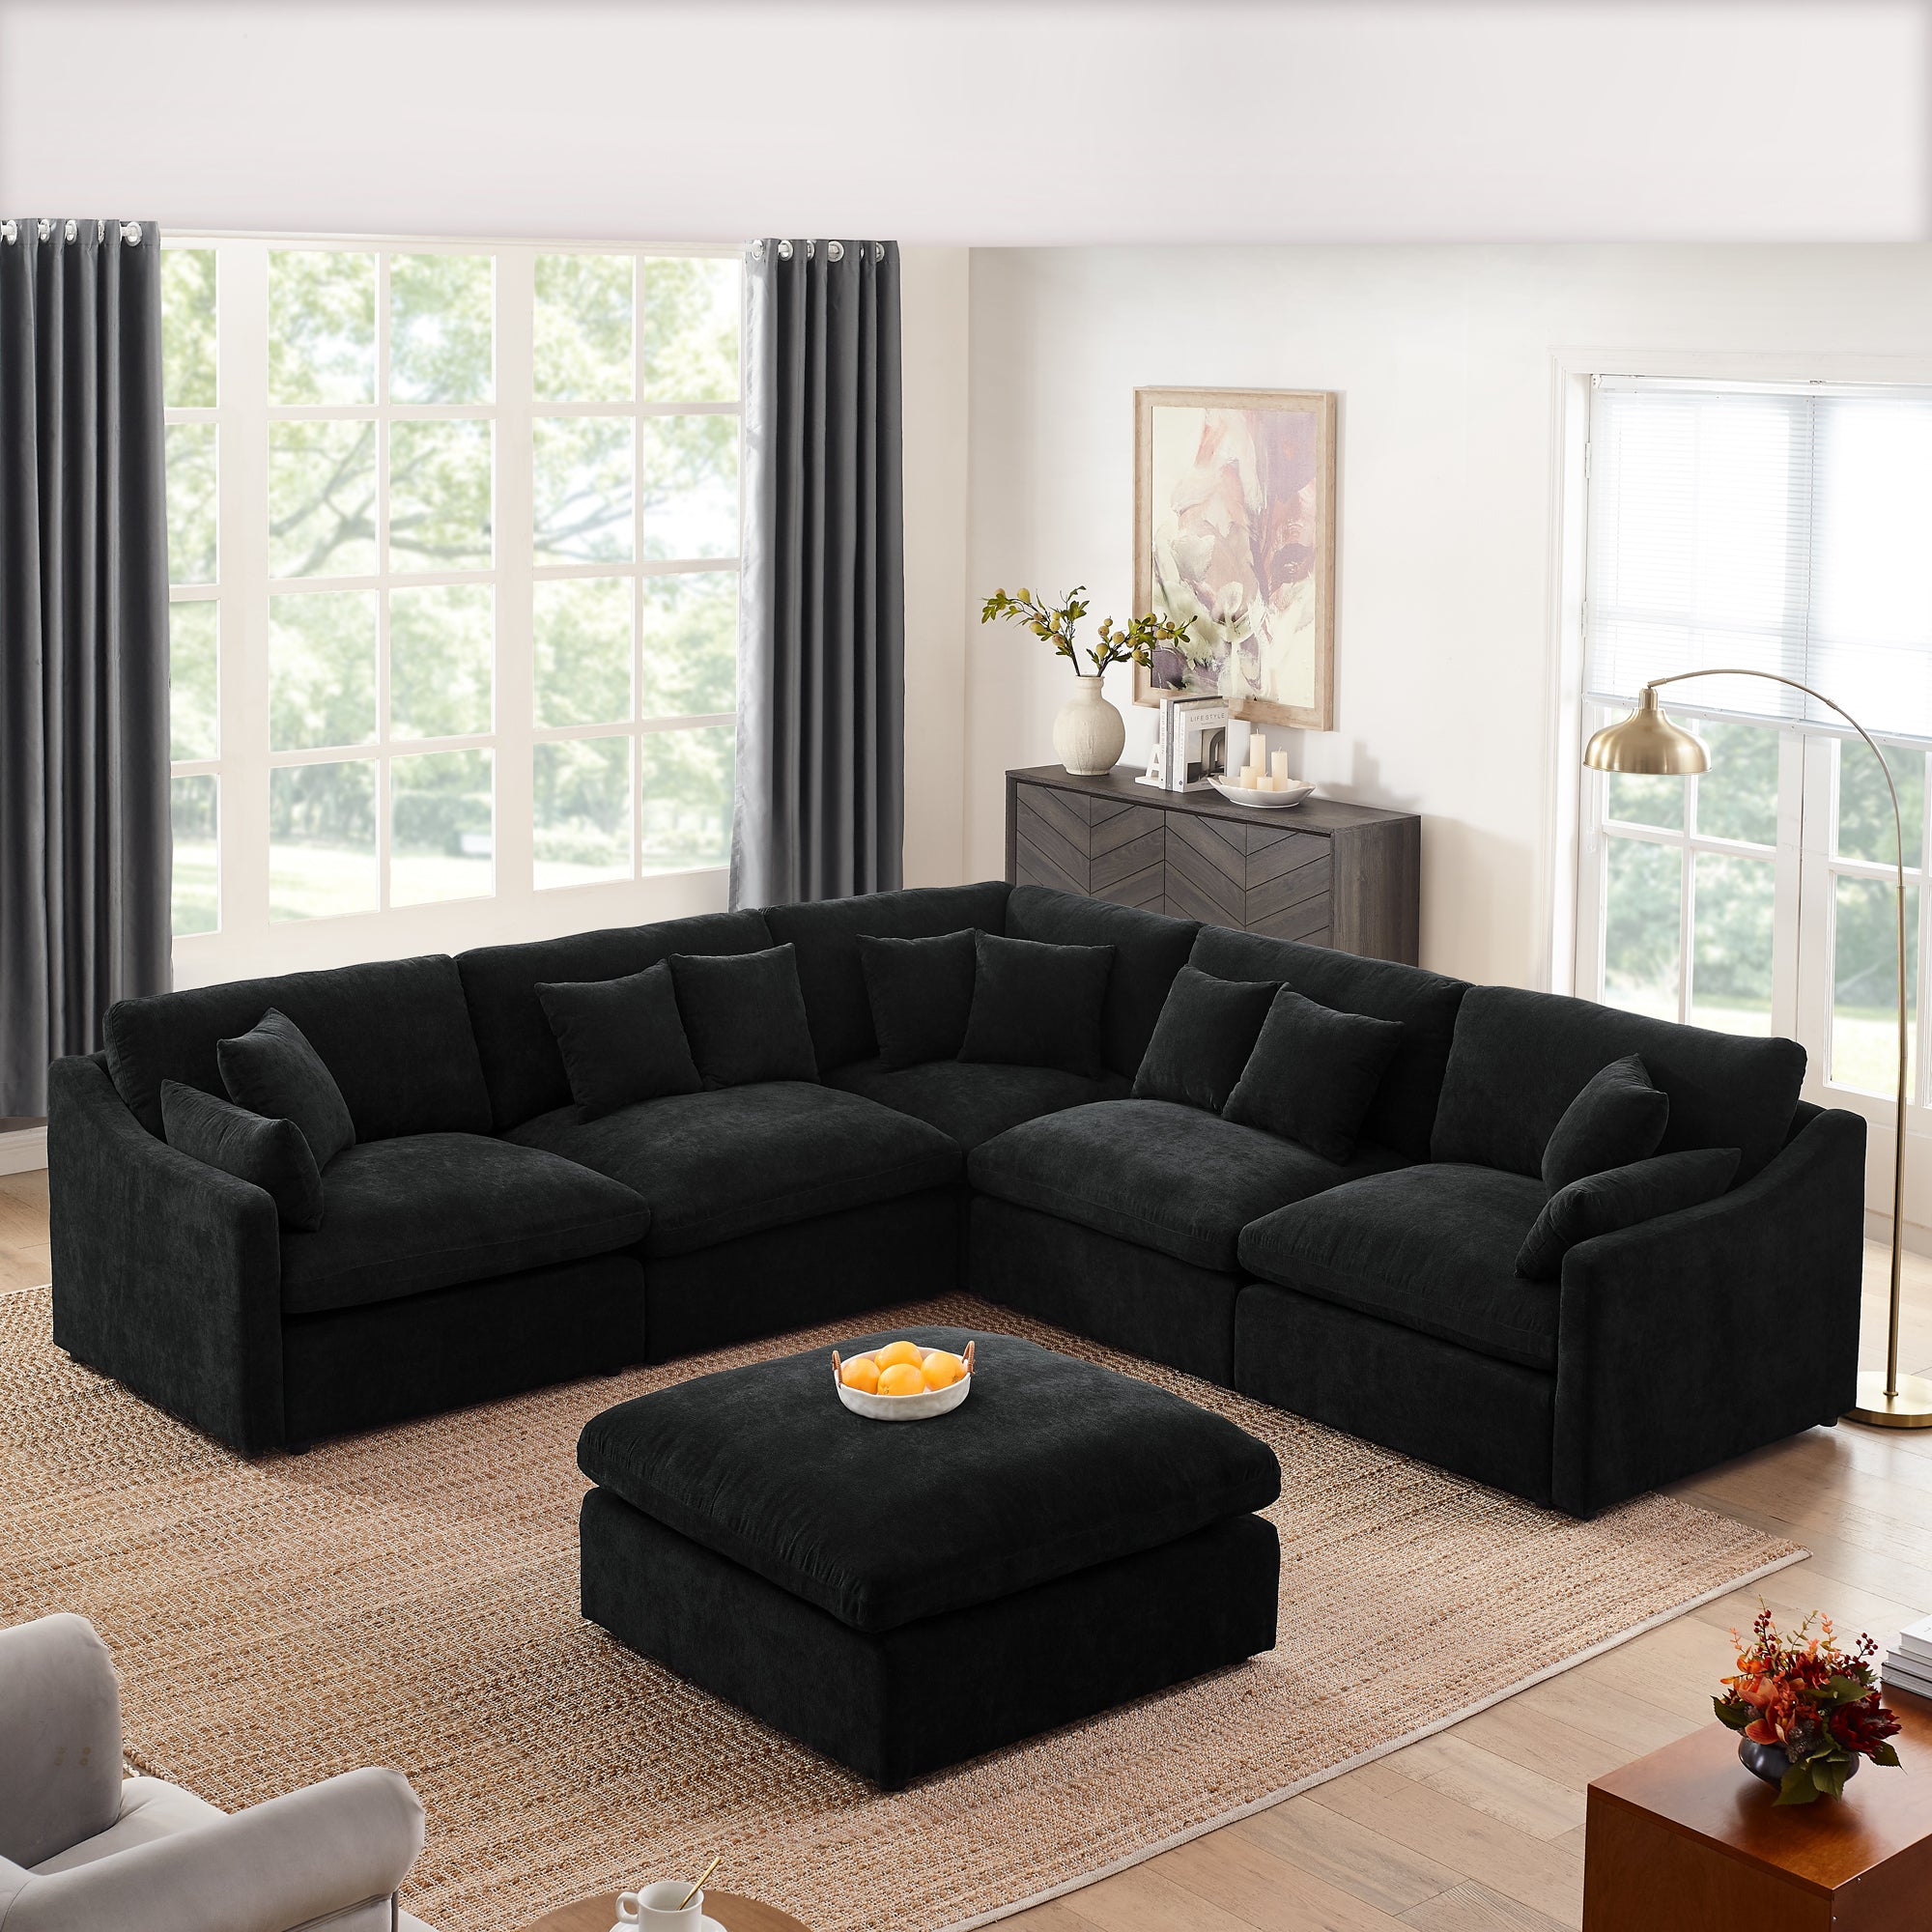 6 Seats Modular L Shaped Sectional Sofa with black-chenille-wood-primary living